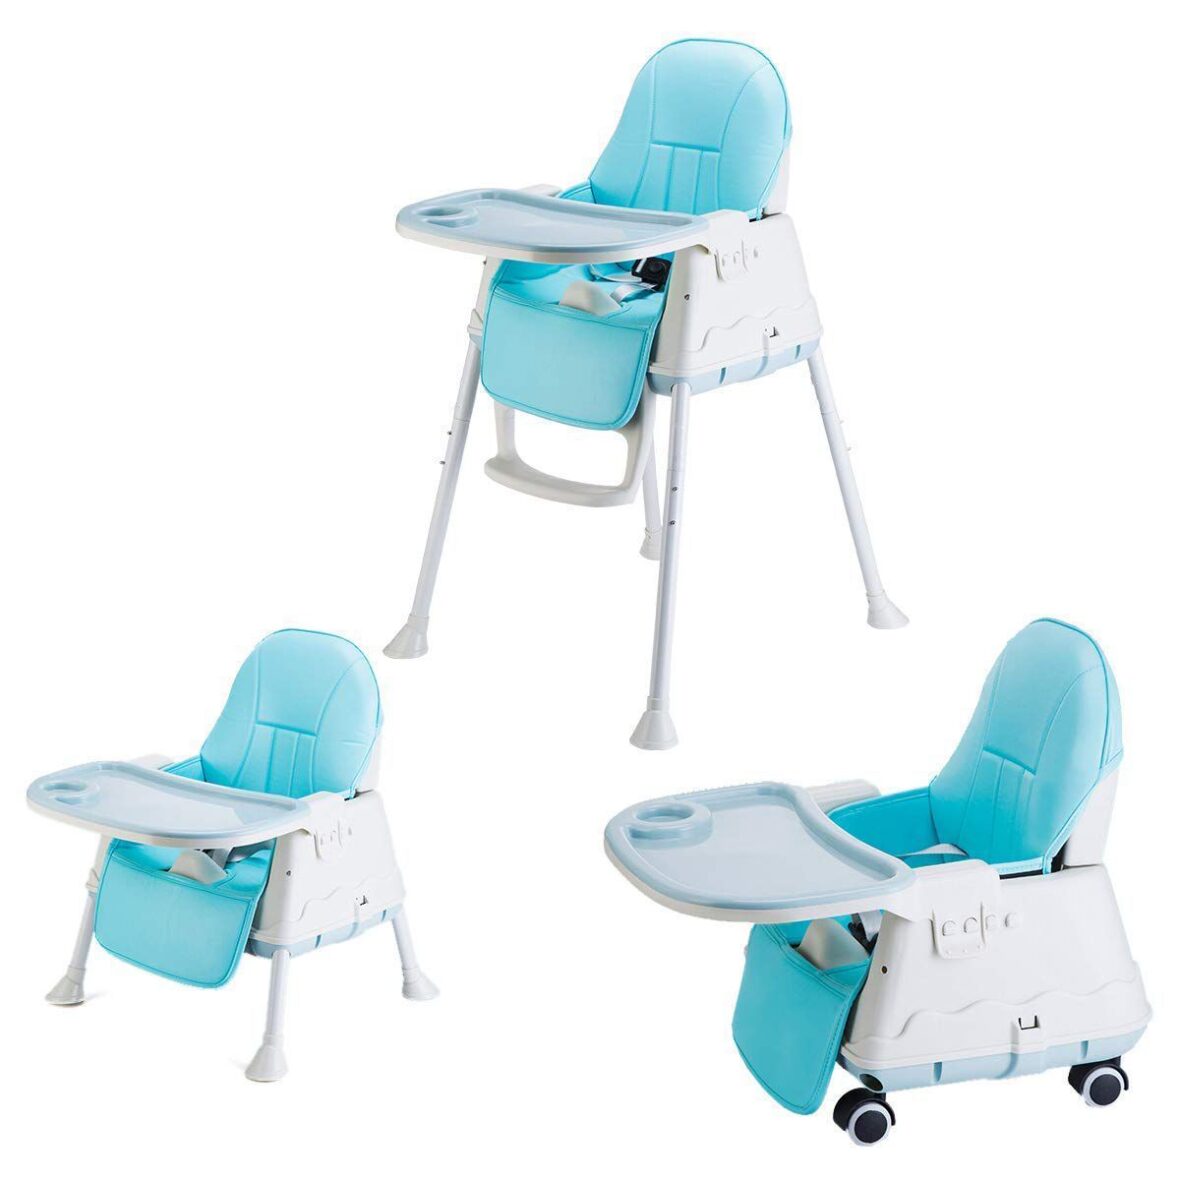 U Smile High Chair for Kids 3 in 1 Cushioned High Chair – Blue